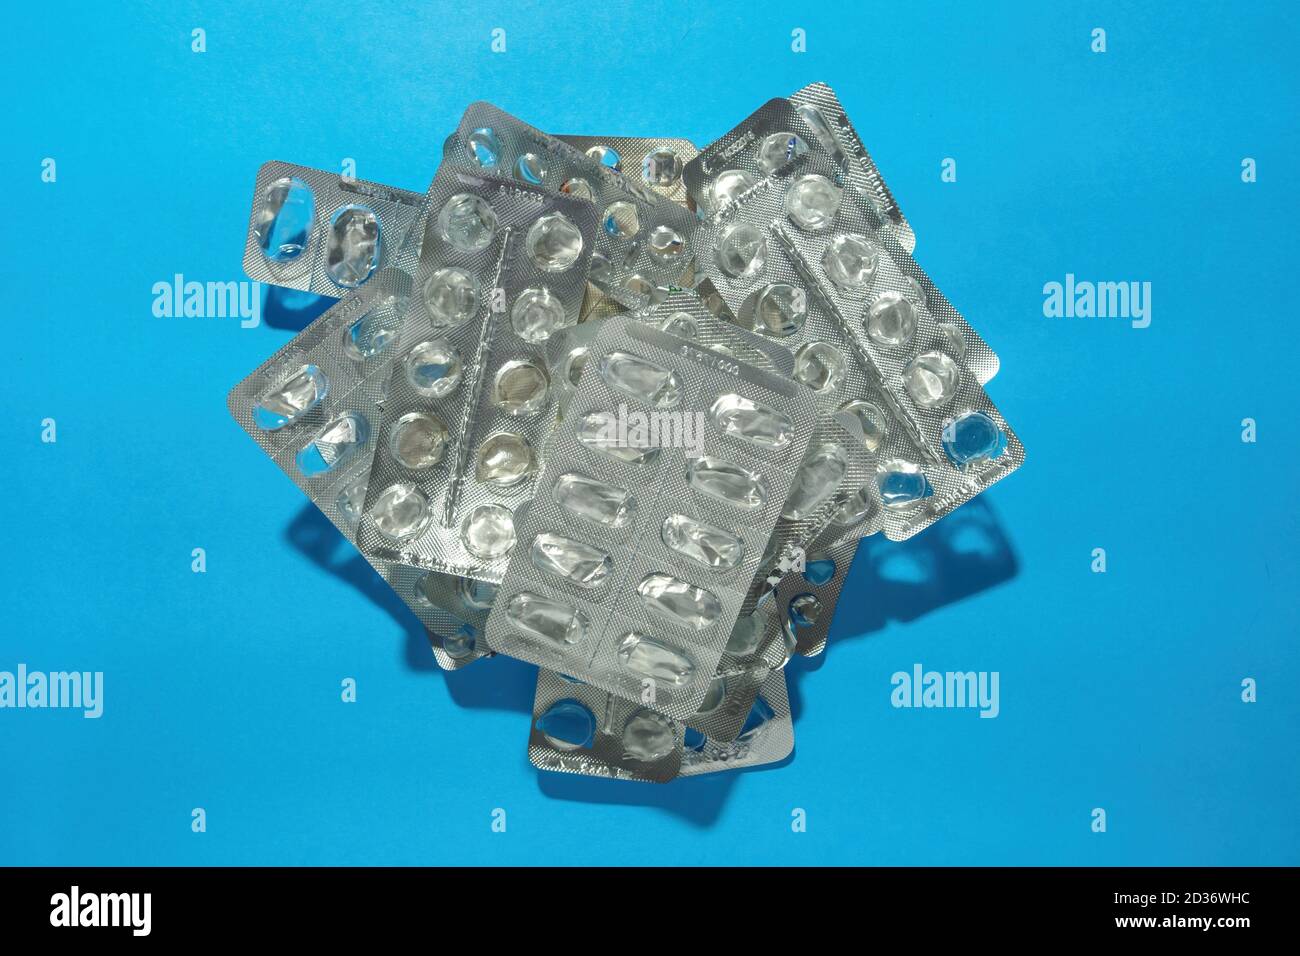 Pile blank blister packs without pills on blue background. Medical and healthcare concept. Top view Stock Photo